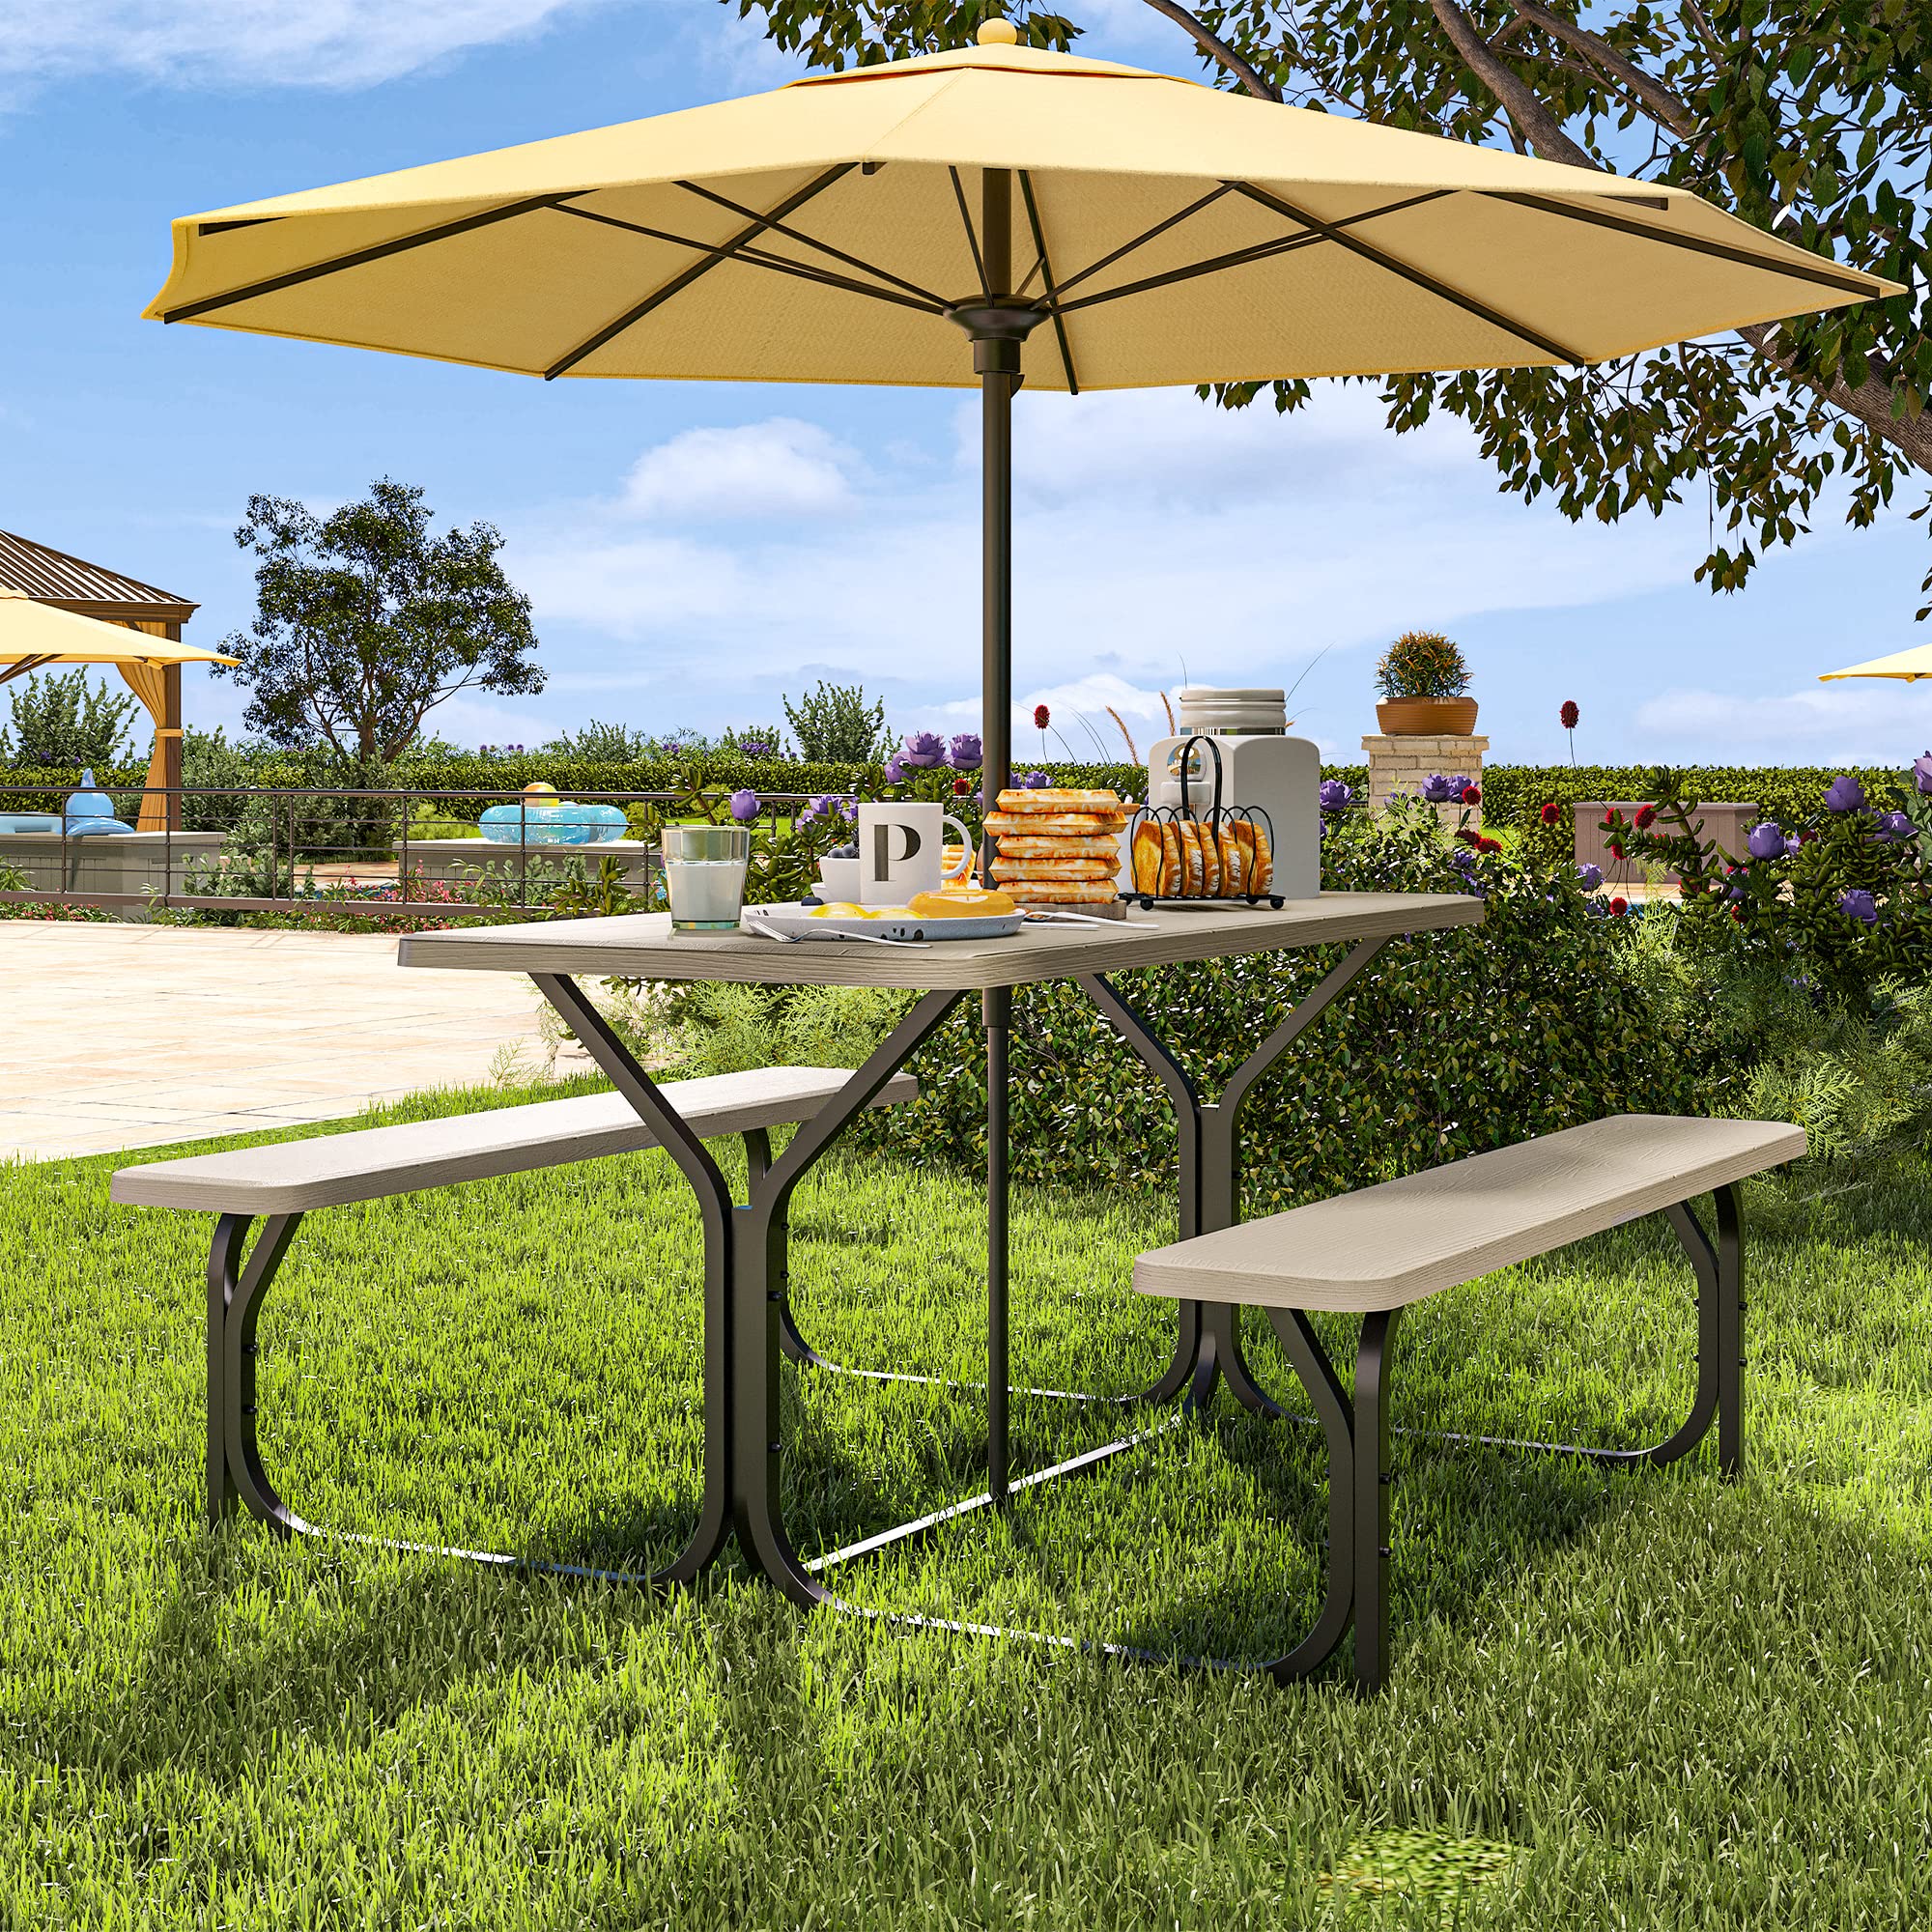 YITAHOME Picnic Table 6ft Heavy Duty Outdoor Picnic Table and Bench Resin Tabletop & Stable Steel Frame w/Umbrella Hole for Yard Patio Lawn Party Light Brown